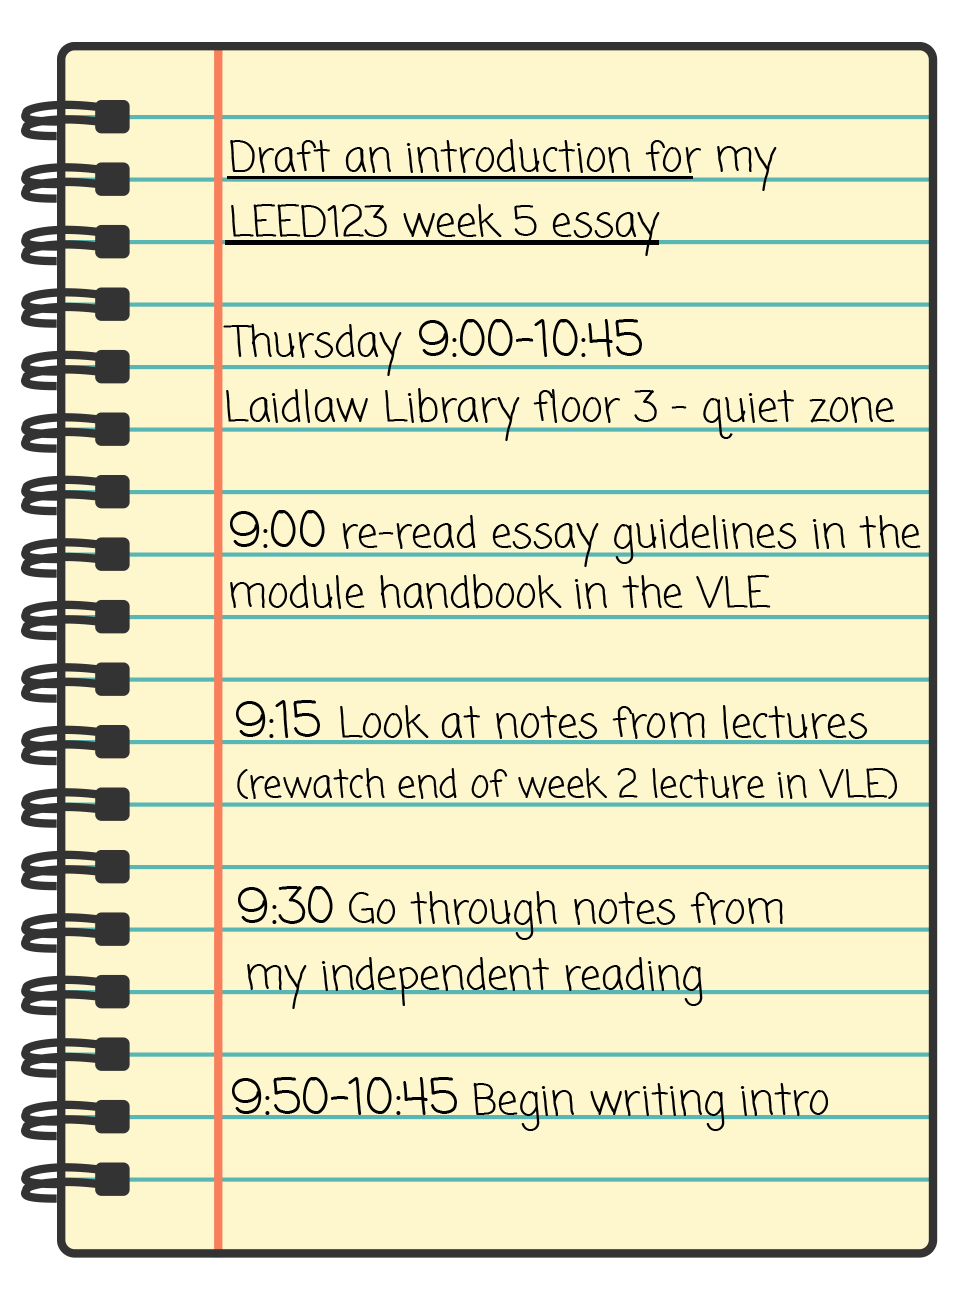 An image of a notebook showing a timeslot of an hour and forty-five mintues broken down into four small tasks. For example re-reading essay guidelines is assigned to the first fifteen minutes followed by fifteen minutes for lecture note reading